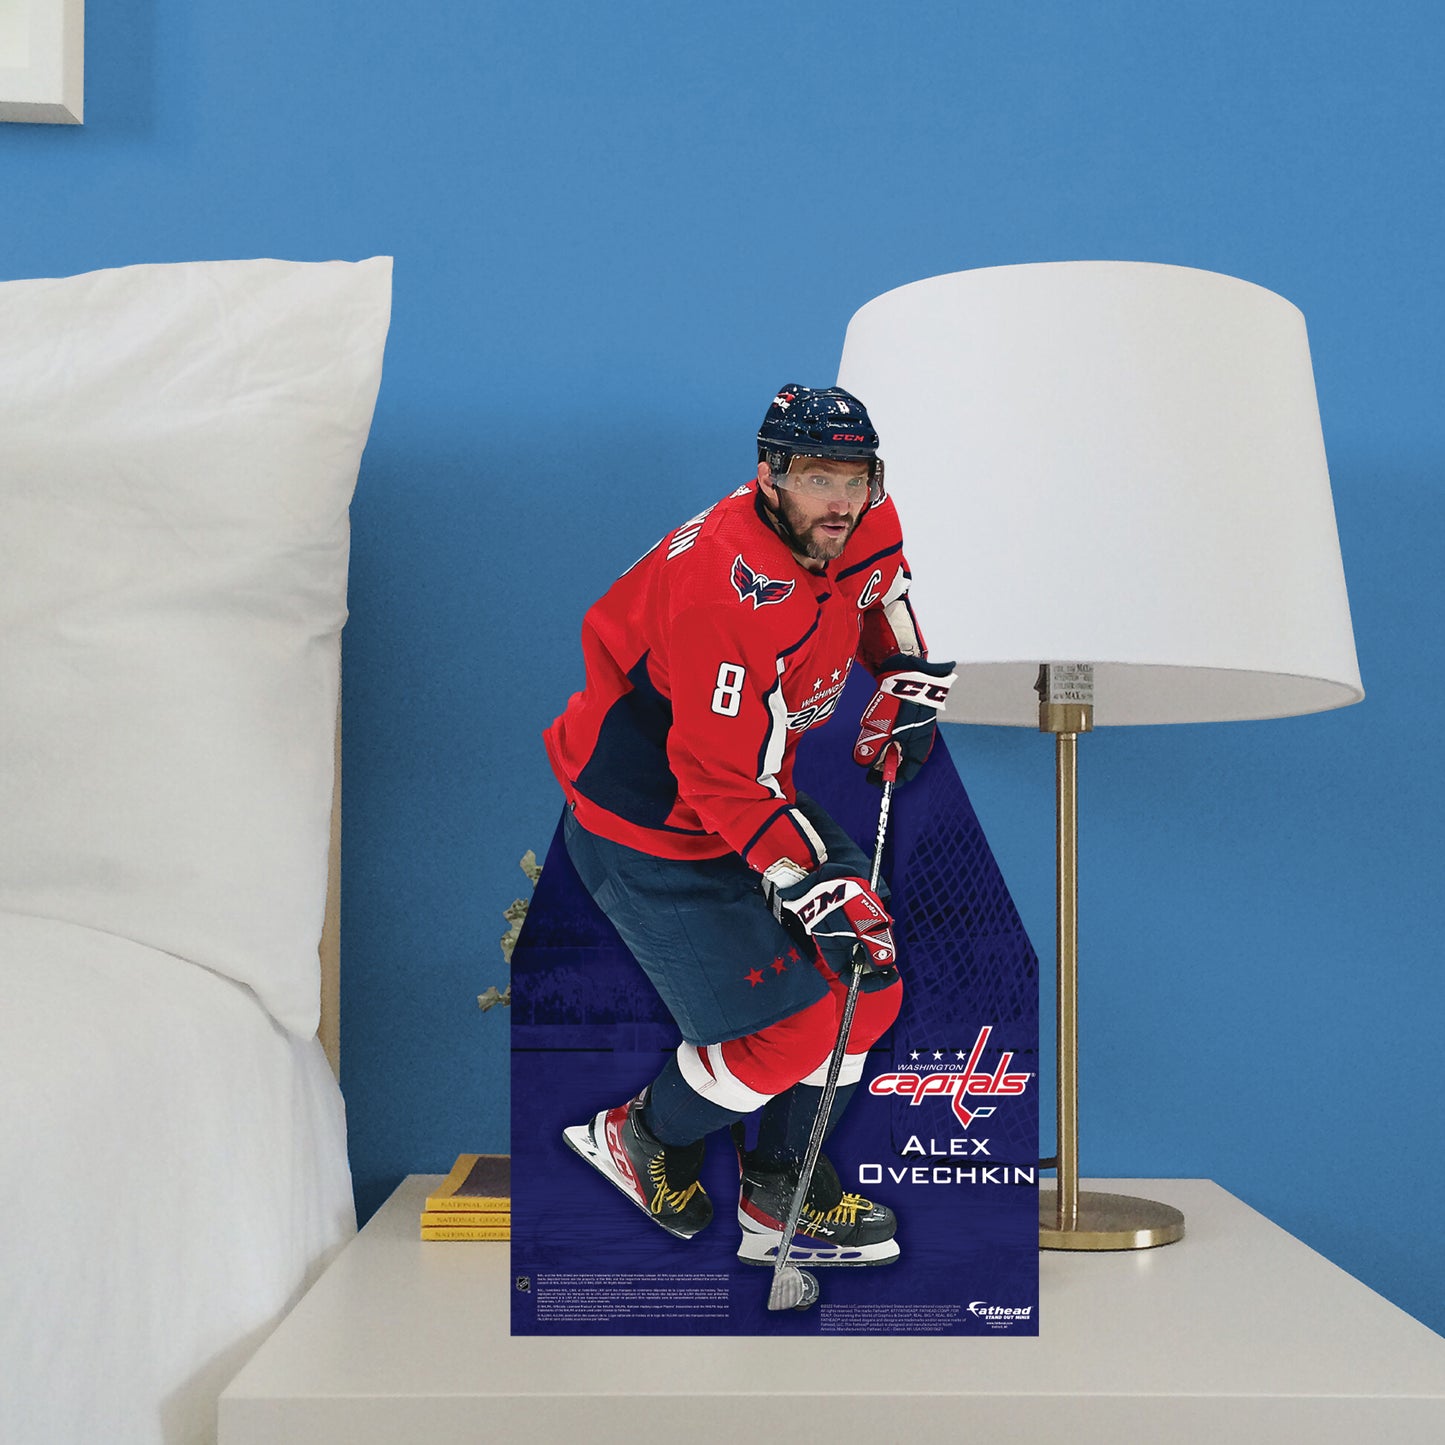 Washington Capitals: Alex Ovechkin 2021  Mini   Cardstock Cutout  - Officially Licensed NHL    Stand Out